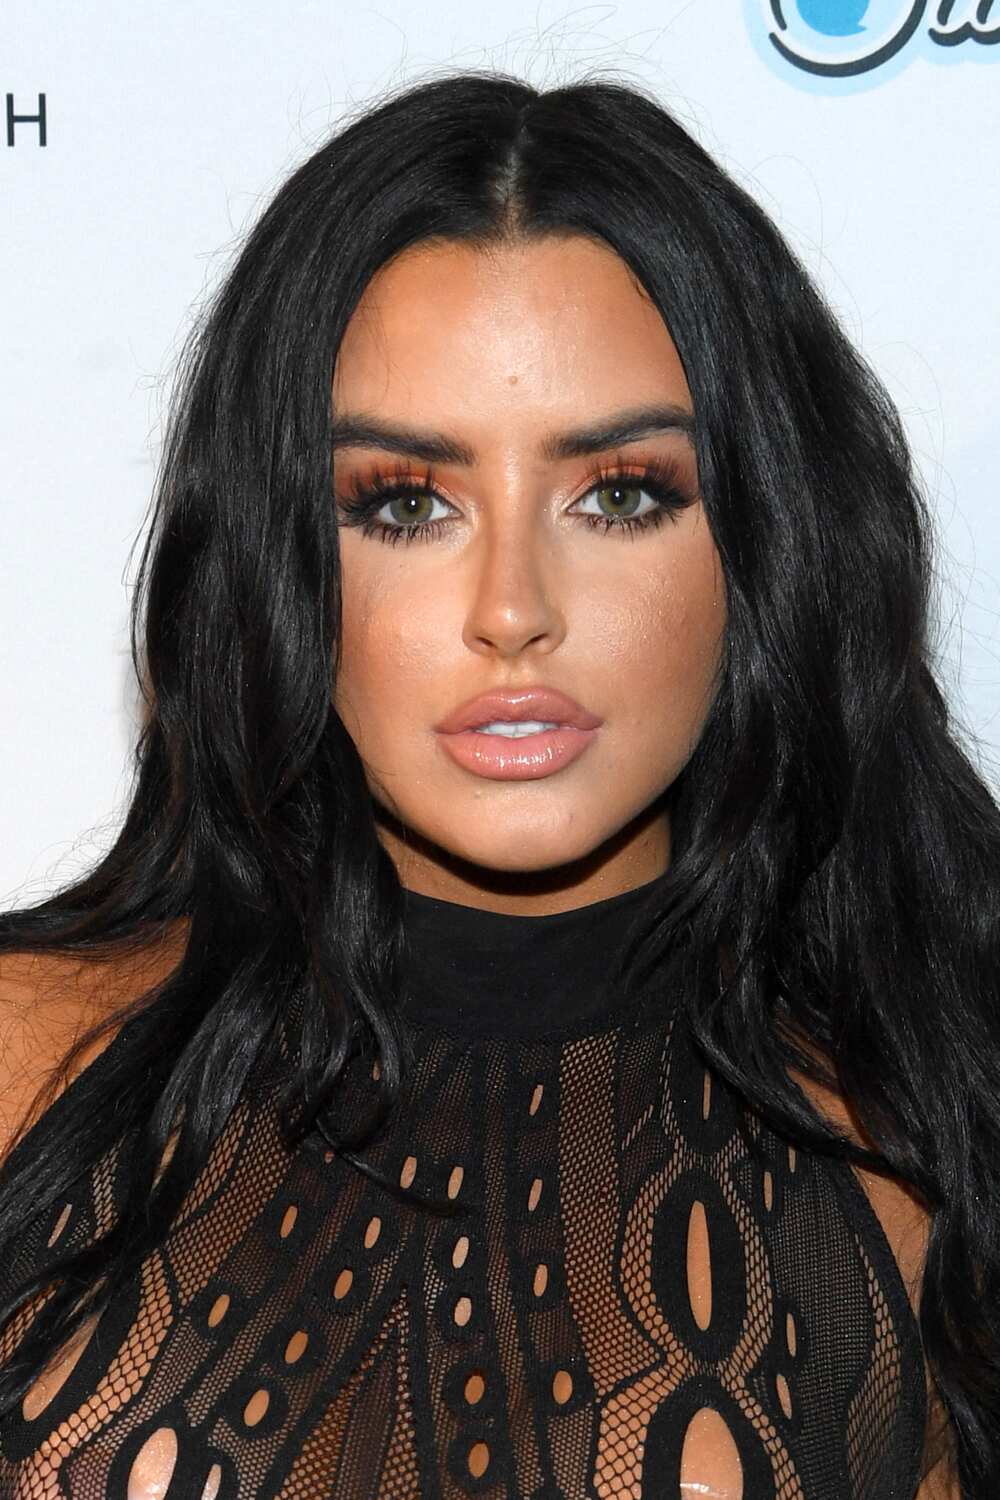 clyde hill recommends abigail ratchford measurements pic